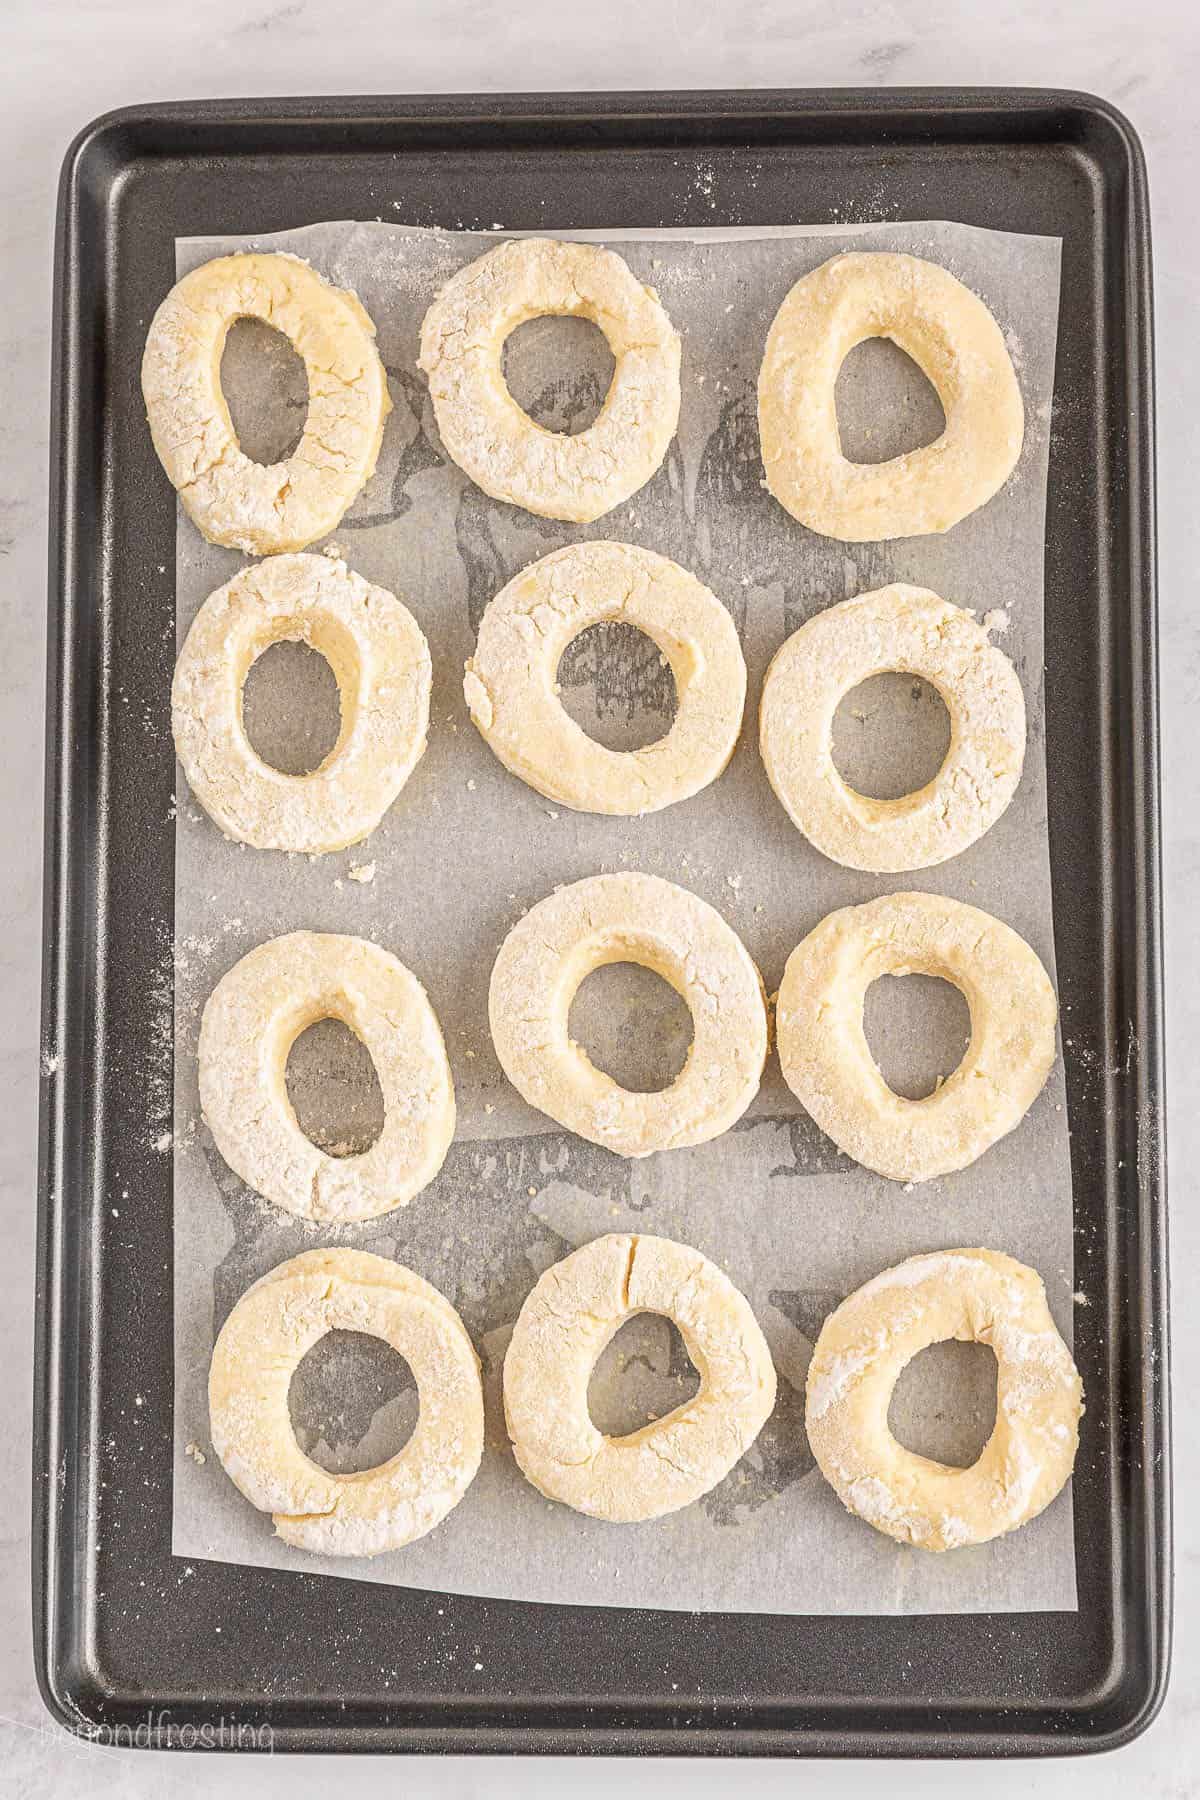 Uncooked donuts on a baking sheet